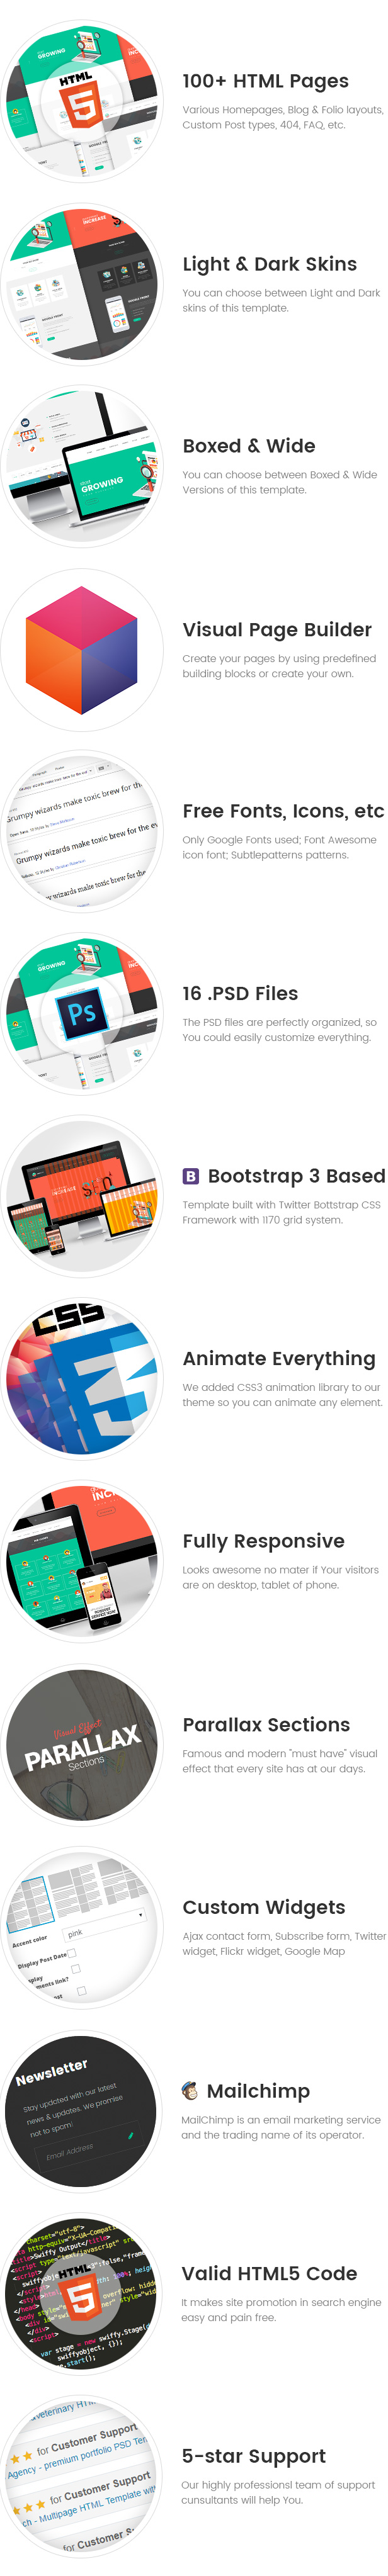 SeoBoost - SEO/Digital Company HTML Template with Visual Page Builder